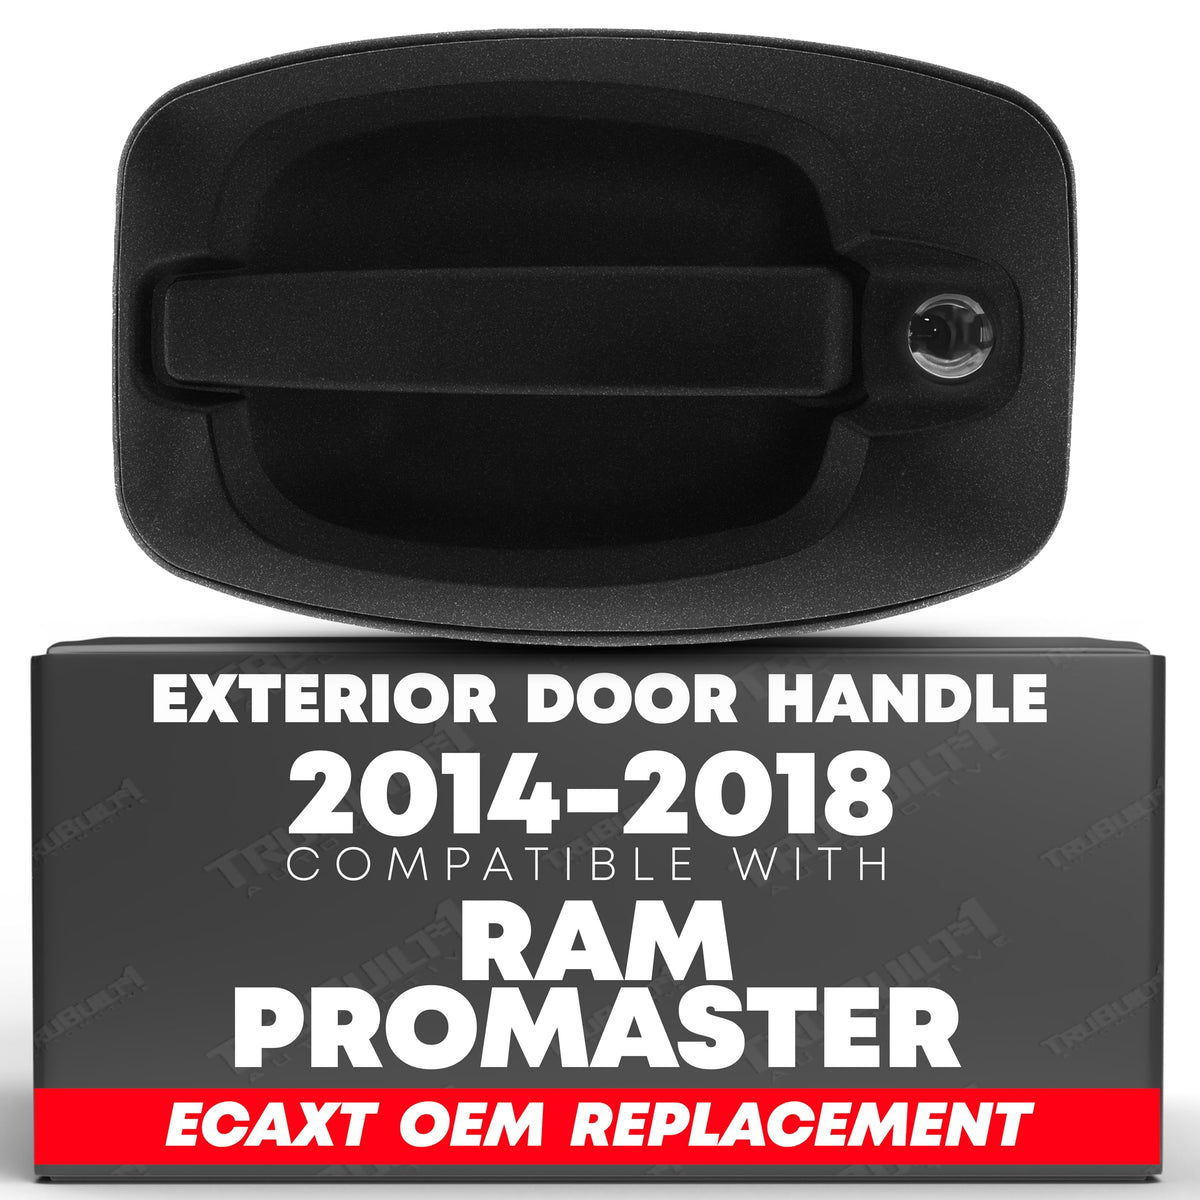 Exterior Front Left Driver Door Handle with Keyhole | Compatible with 2014- 2018 RAM Promaster 1500 2500 3500, and 2008-2020 FIAT Ducato - Textured Black | Replaces Part # 5RK15JXWAB 15708